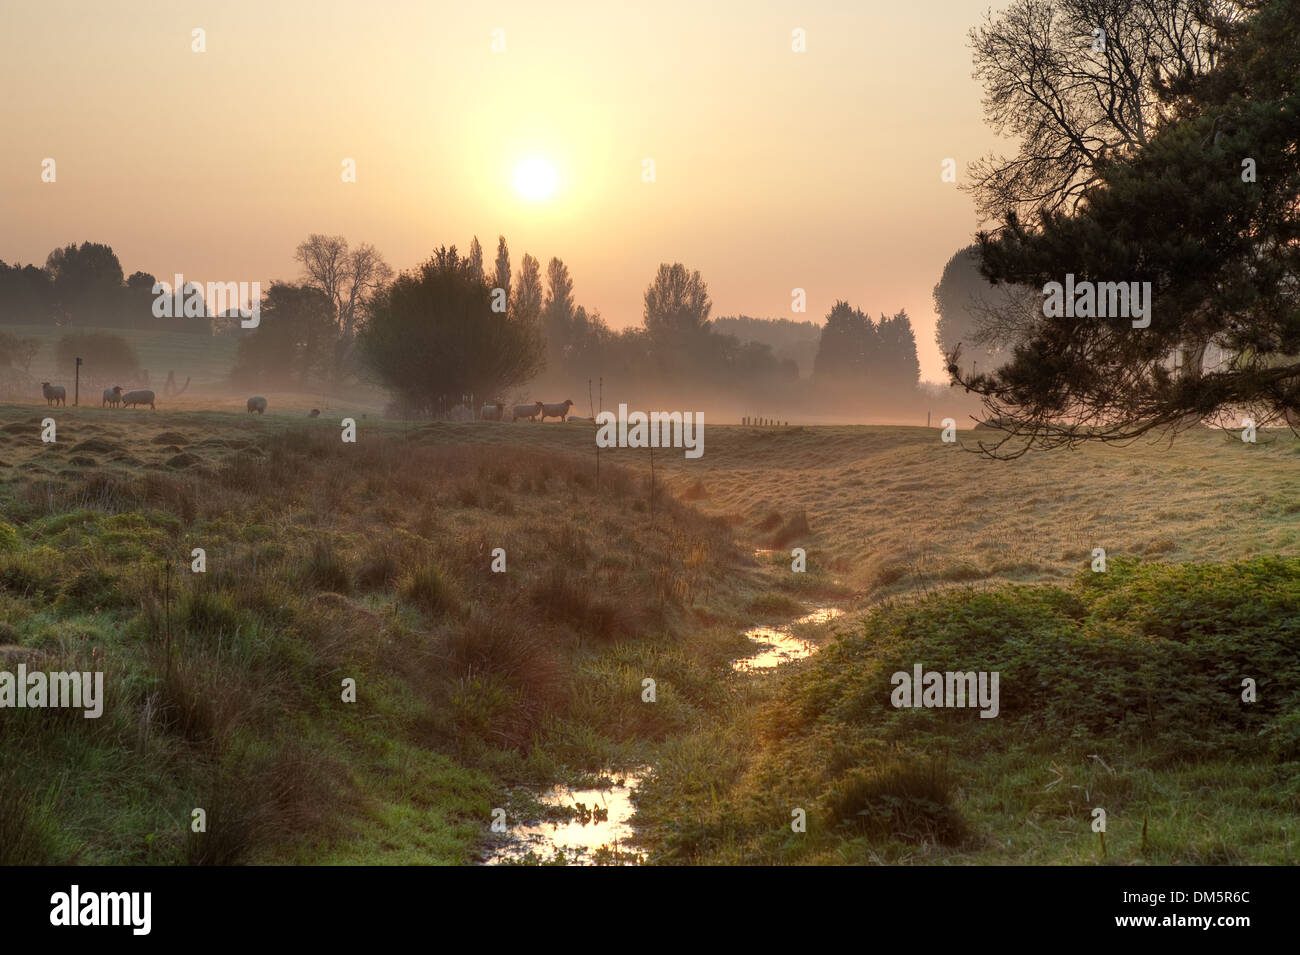 Farmland with sheep at dawn, Chipping Campden, Gloucestershire, England. Stock Photo